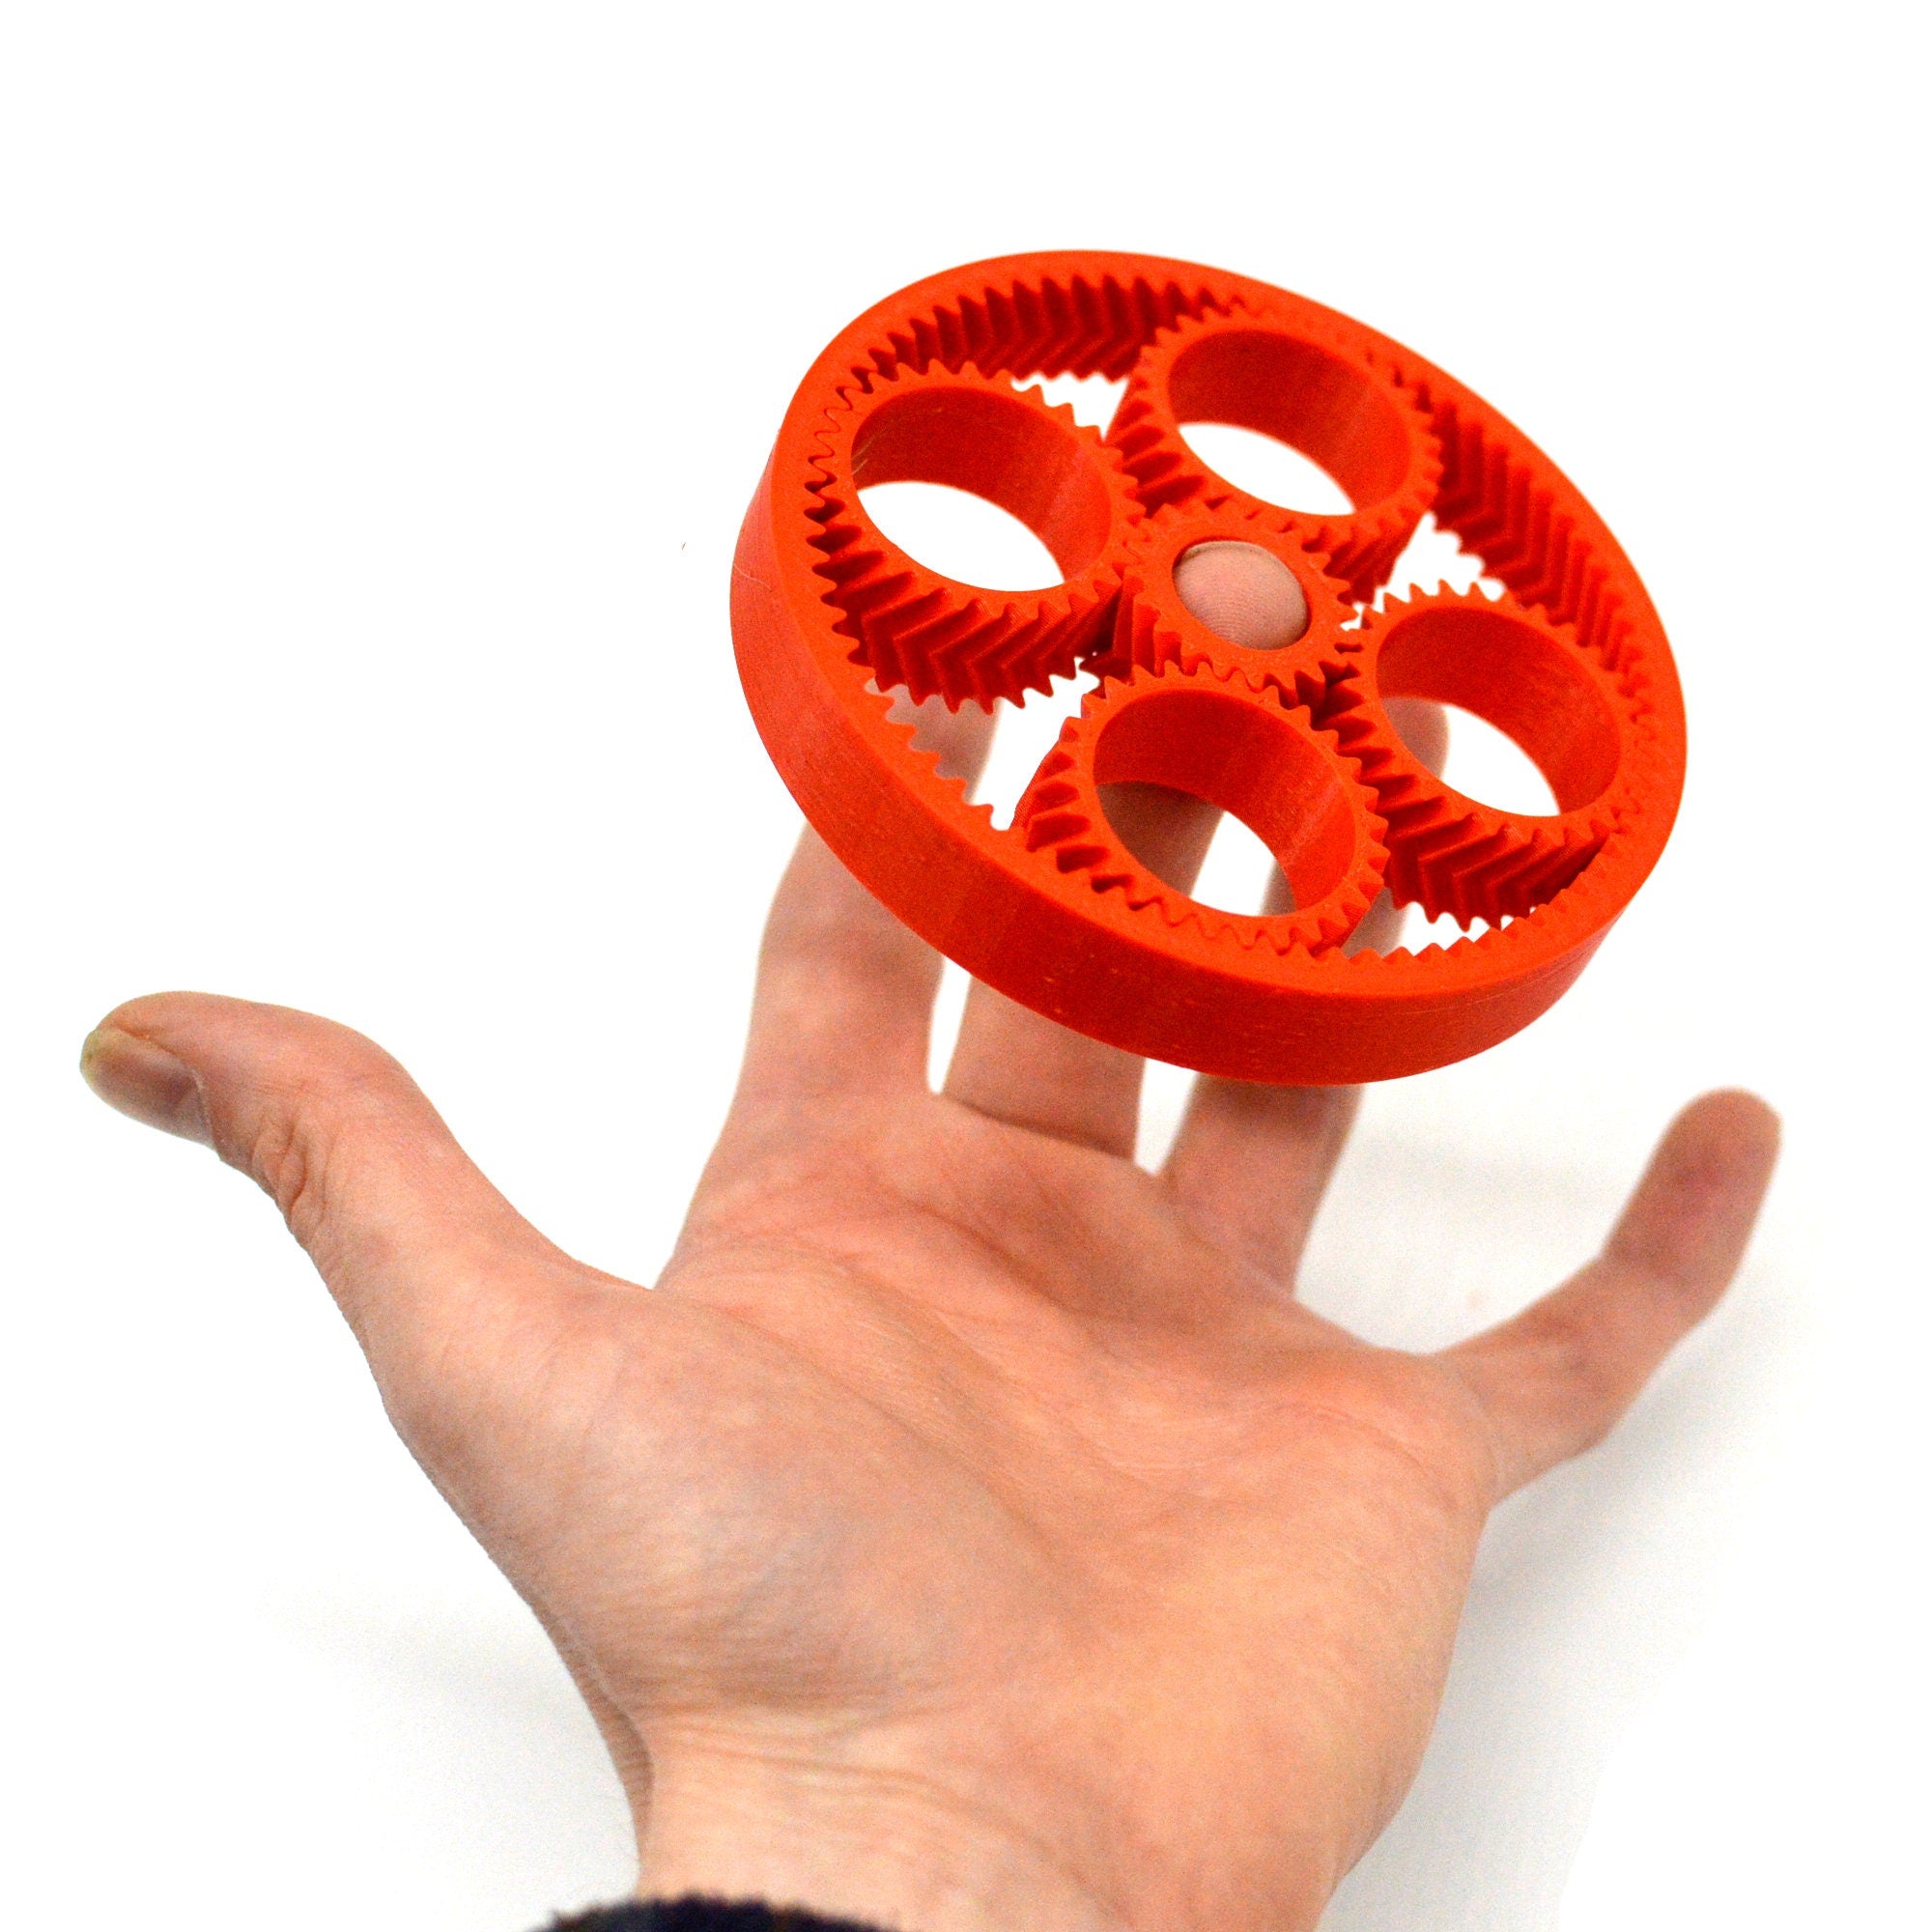 Fidget Spinner Gear Toy - 3D Printed Fun Toy for Kids and Adults